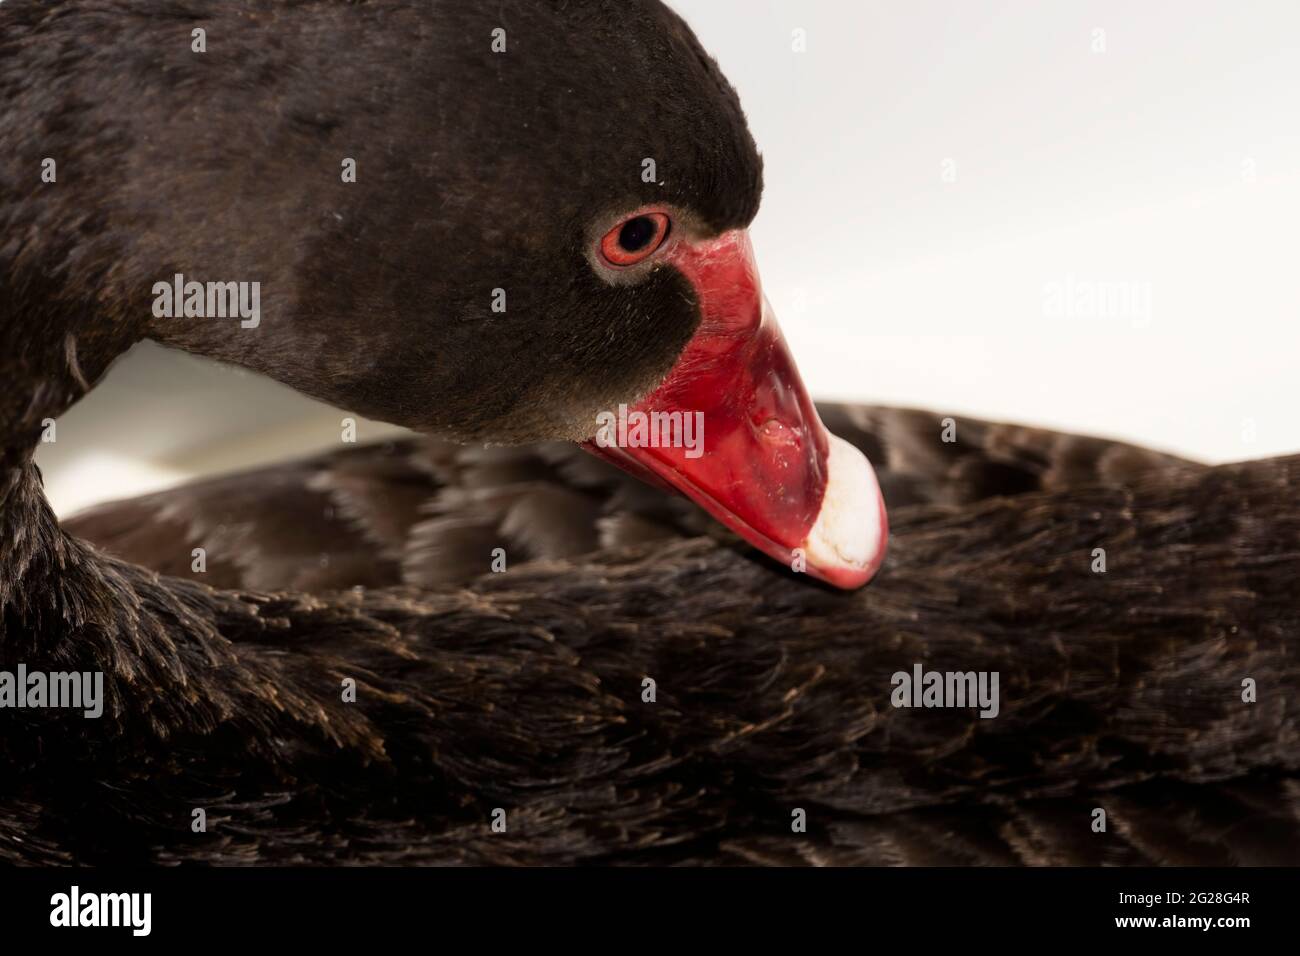 An extreme closeup portrait of an Australian black swan showing the curved neck, red beak and red eyes found in this large waterbird. Stock Photo